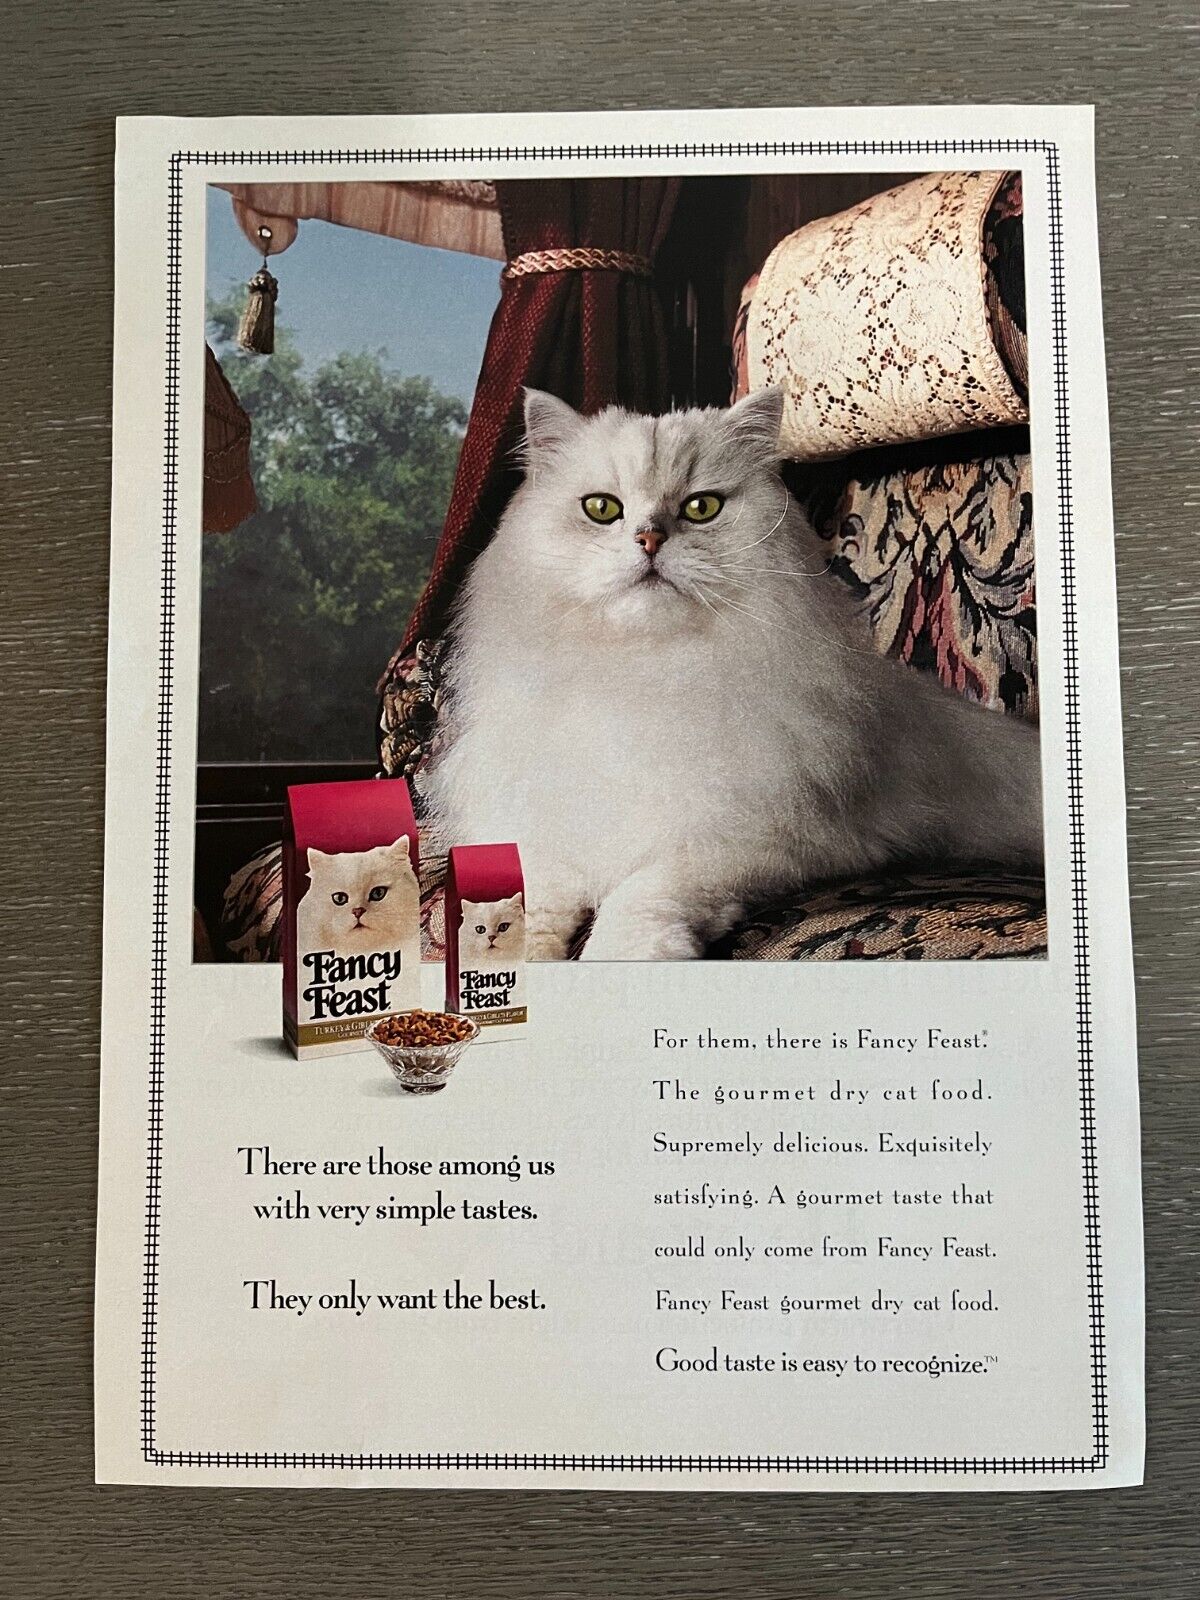 1994 Fancy Feast Cat Food Persian Magazine Print Ad - They Only Want The Best